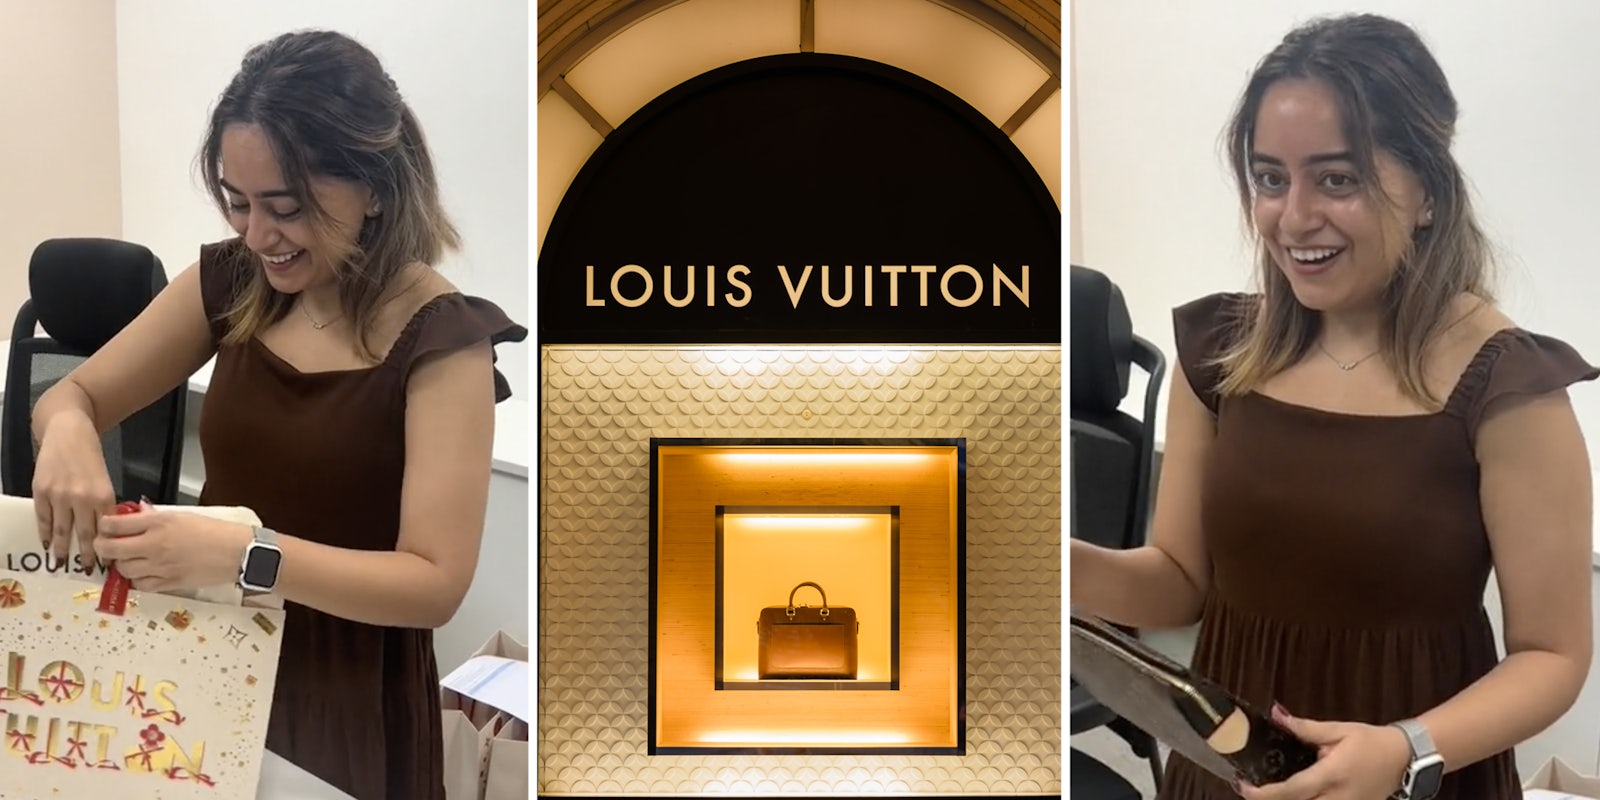 Woman opening gift(l+r), Louis Vuitton store(c)